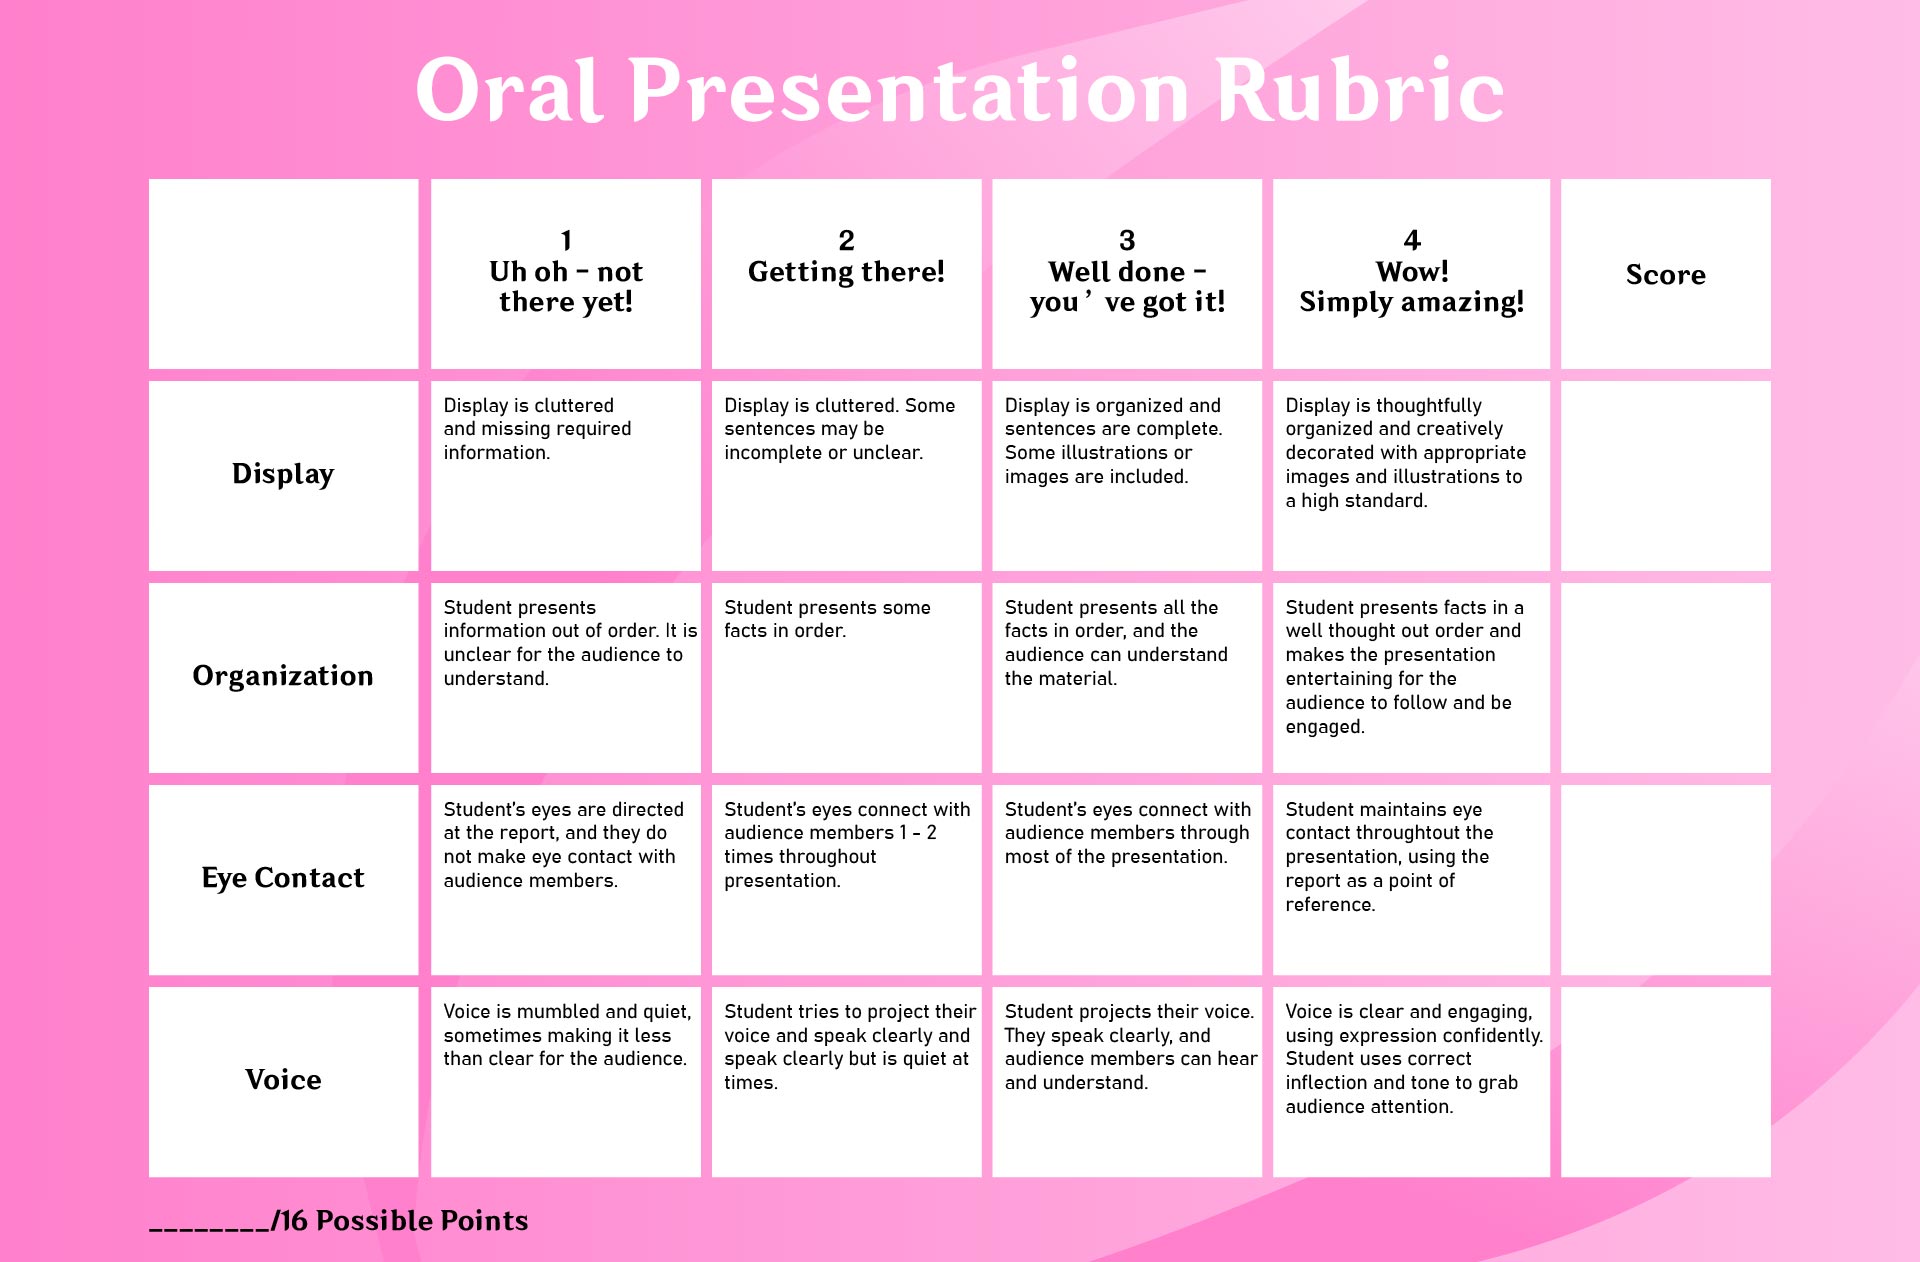 peer review rubric for presentations pdf